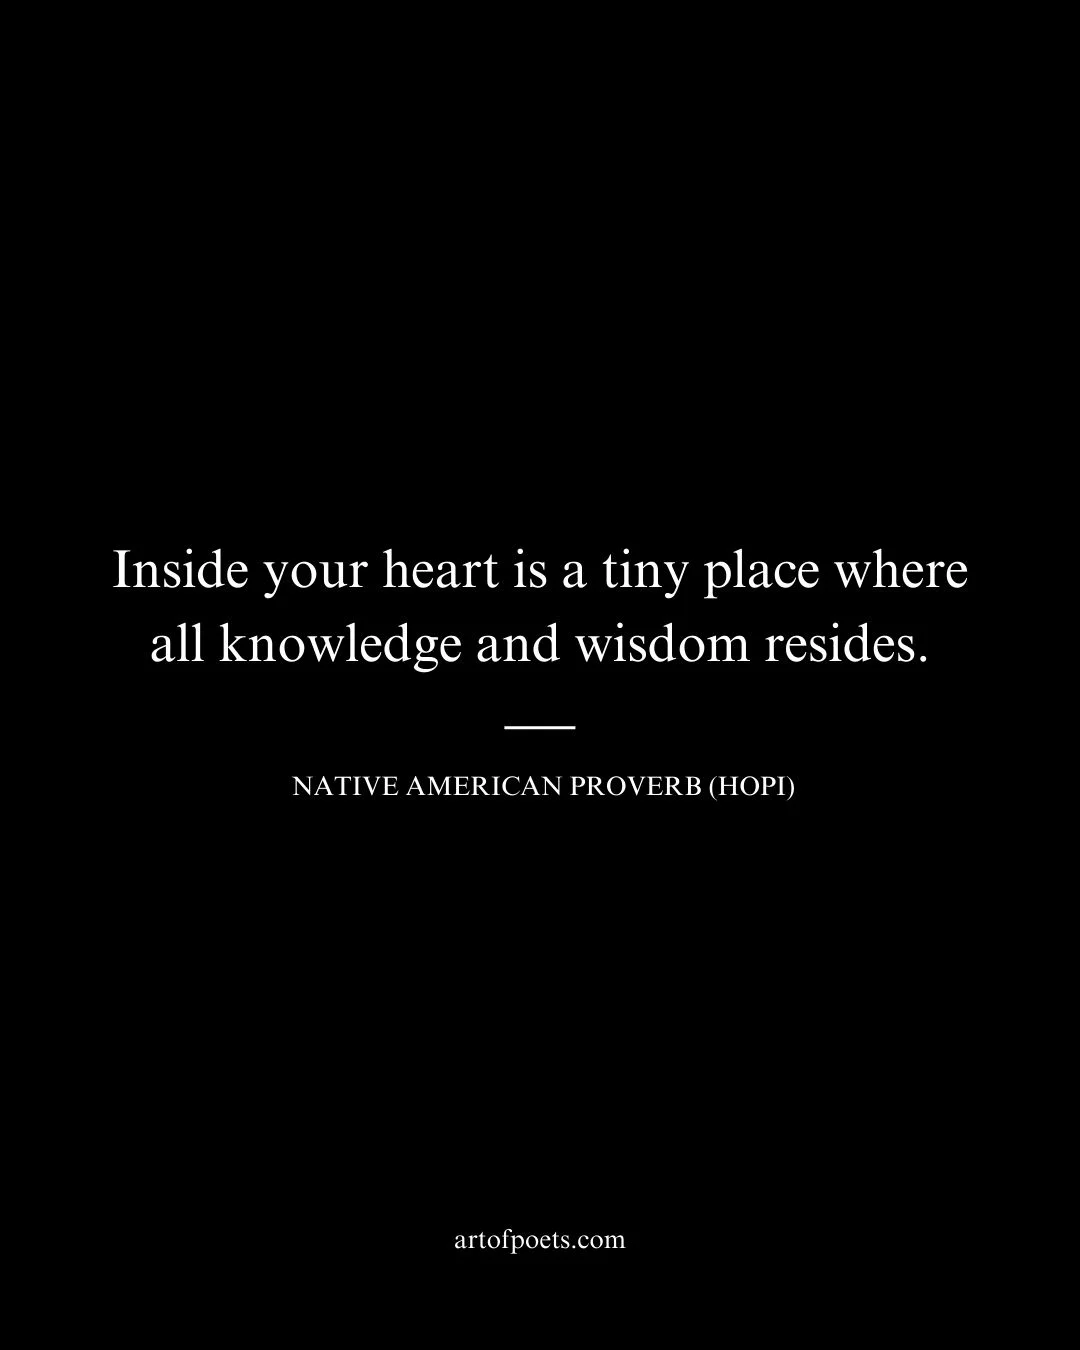 Inside your heart is a tiny place where all knowledge and wisdom resides